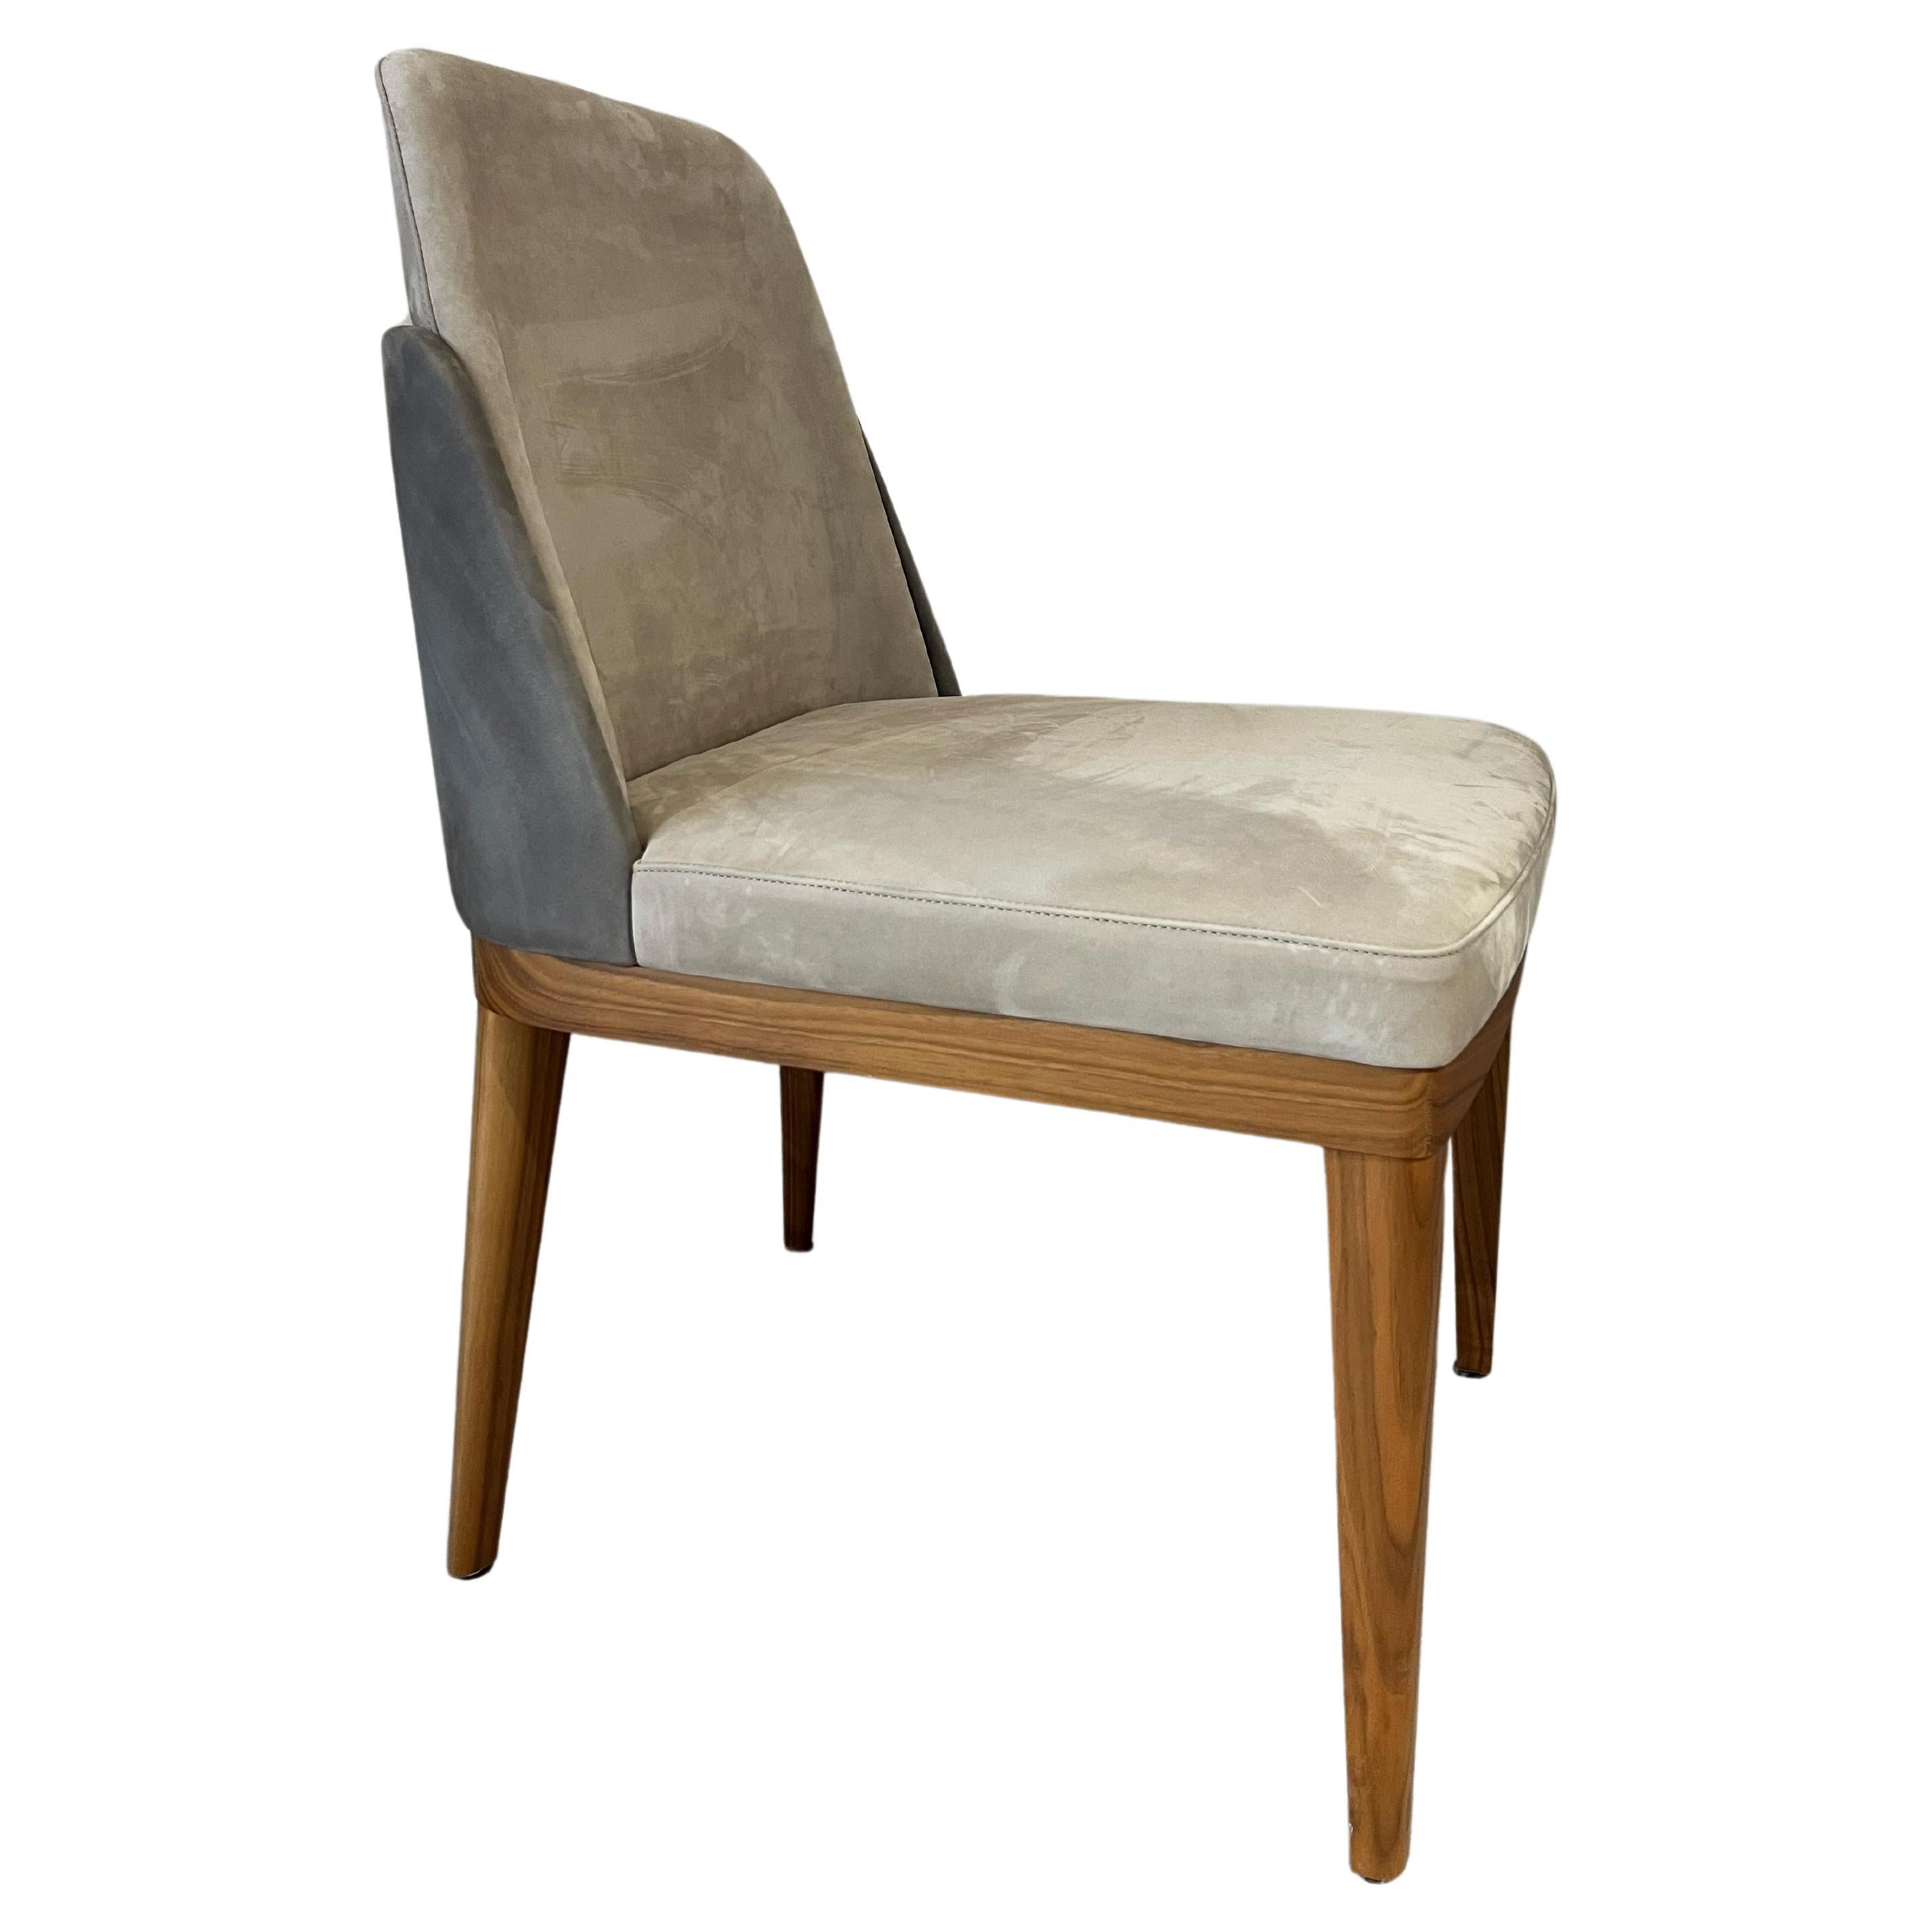 Nora nubuck leather and American walnut wood dining chair